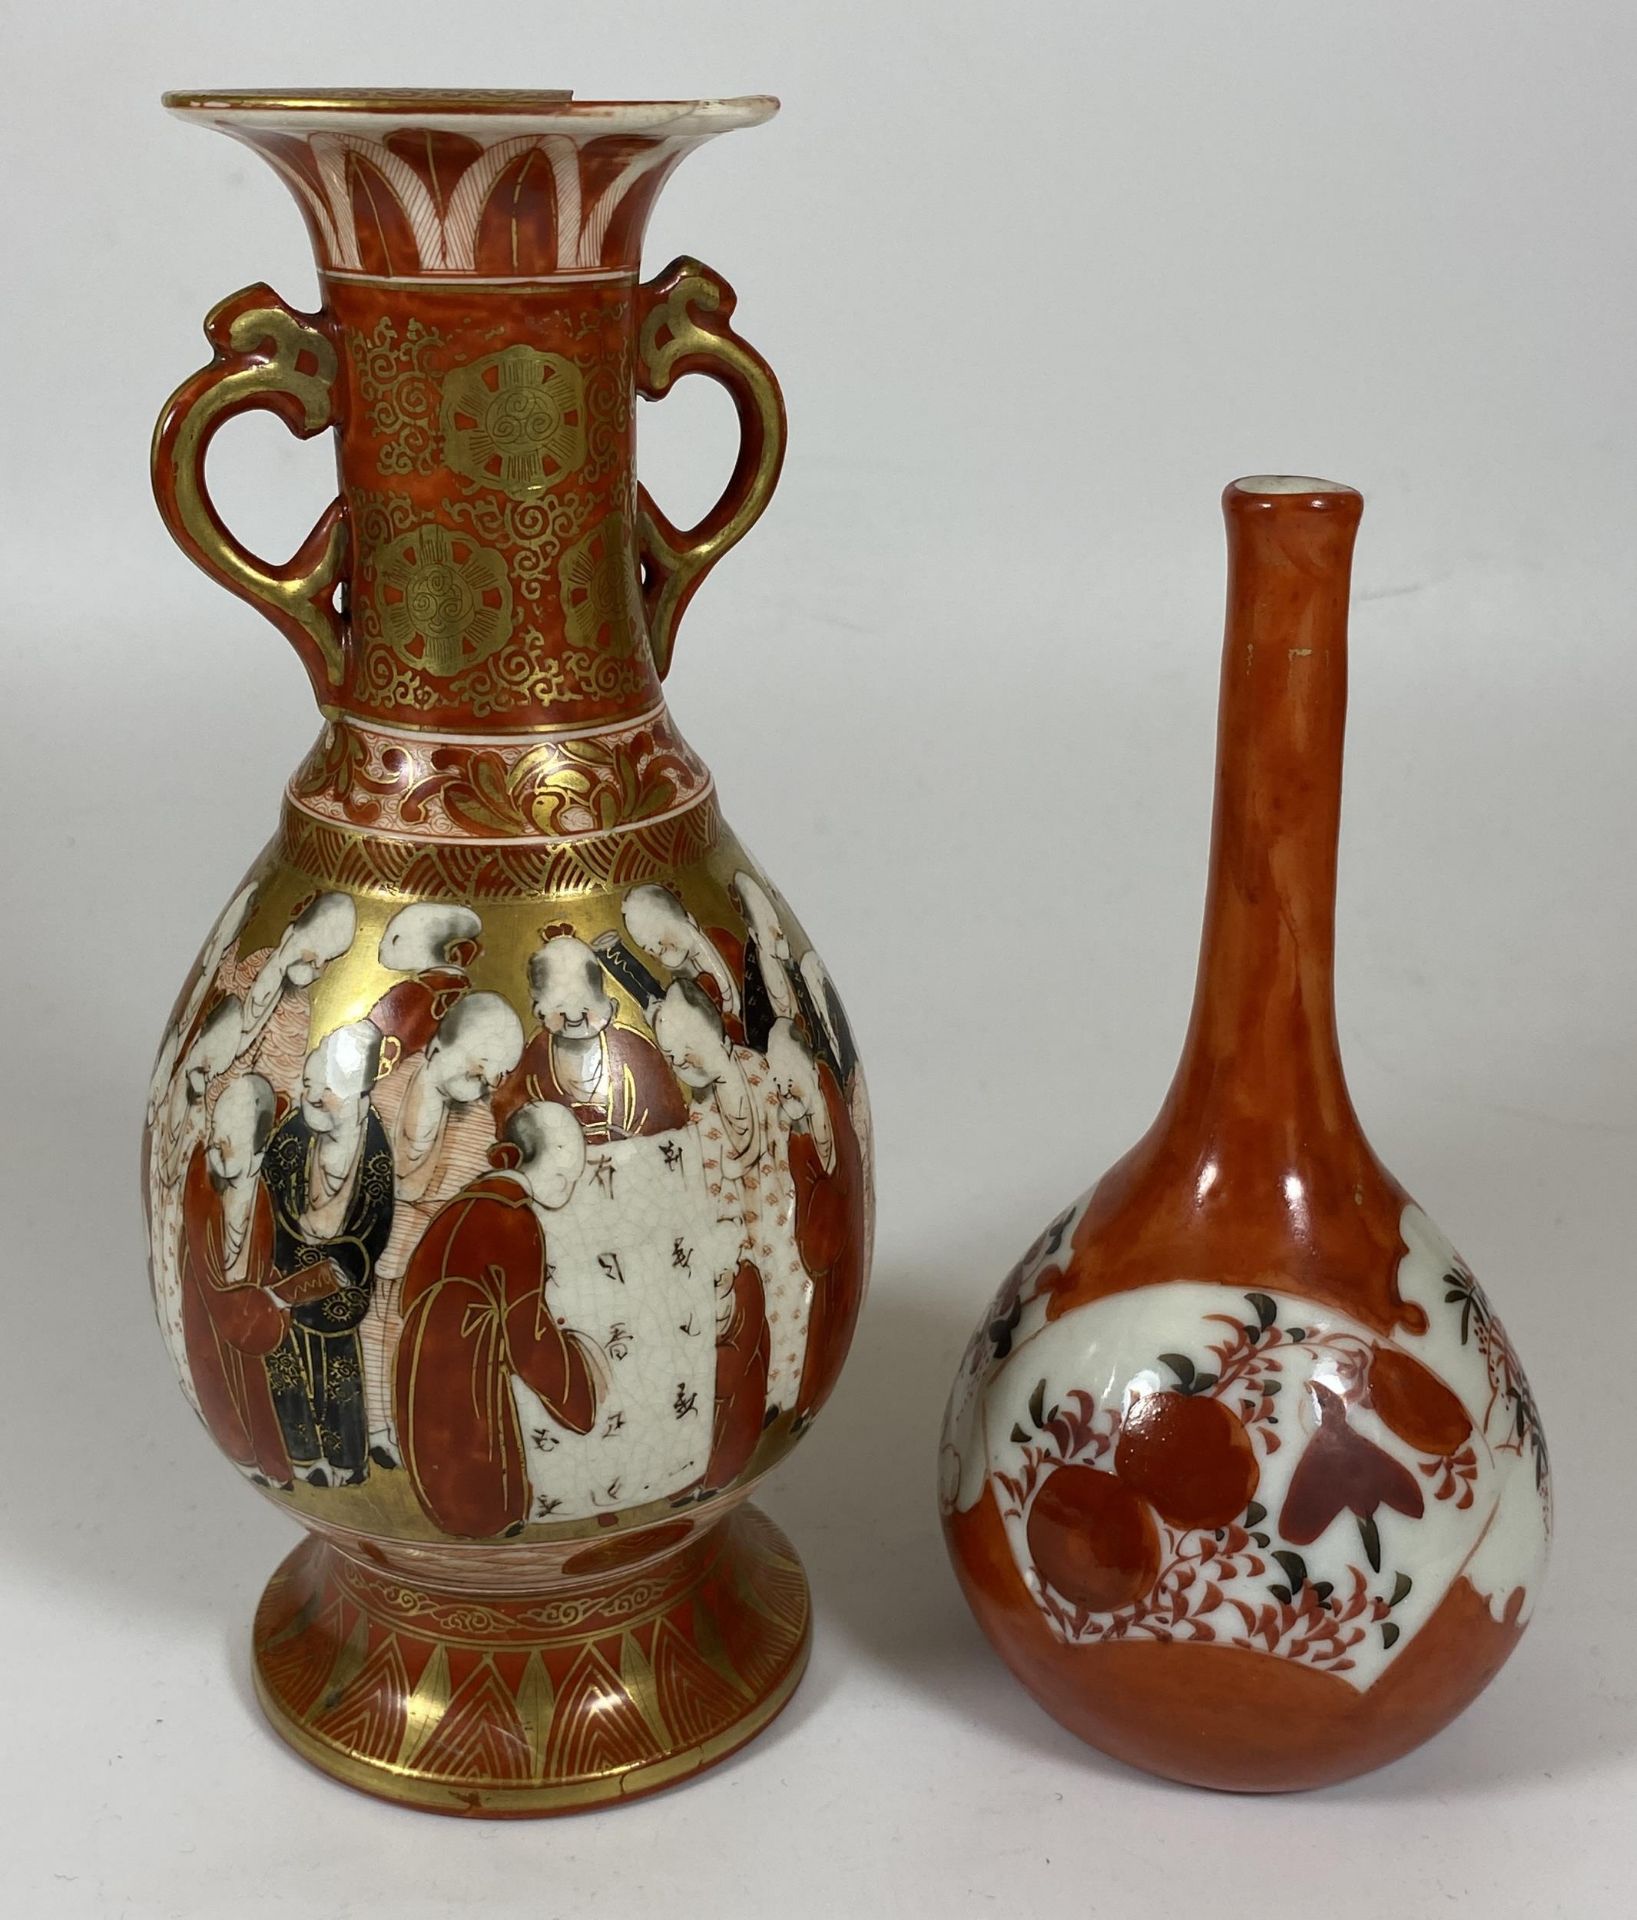 TWO JAPANESE KUTANI ITEMS - TWIN HANDLED VASE WITH SCHOLARS DESIGN AND SMALLER BOTTLE SHAPED